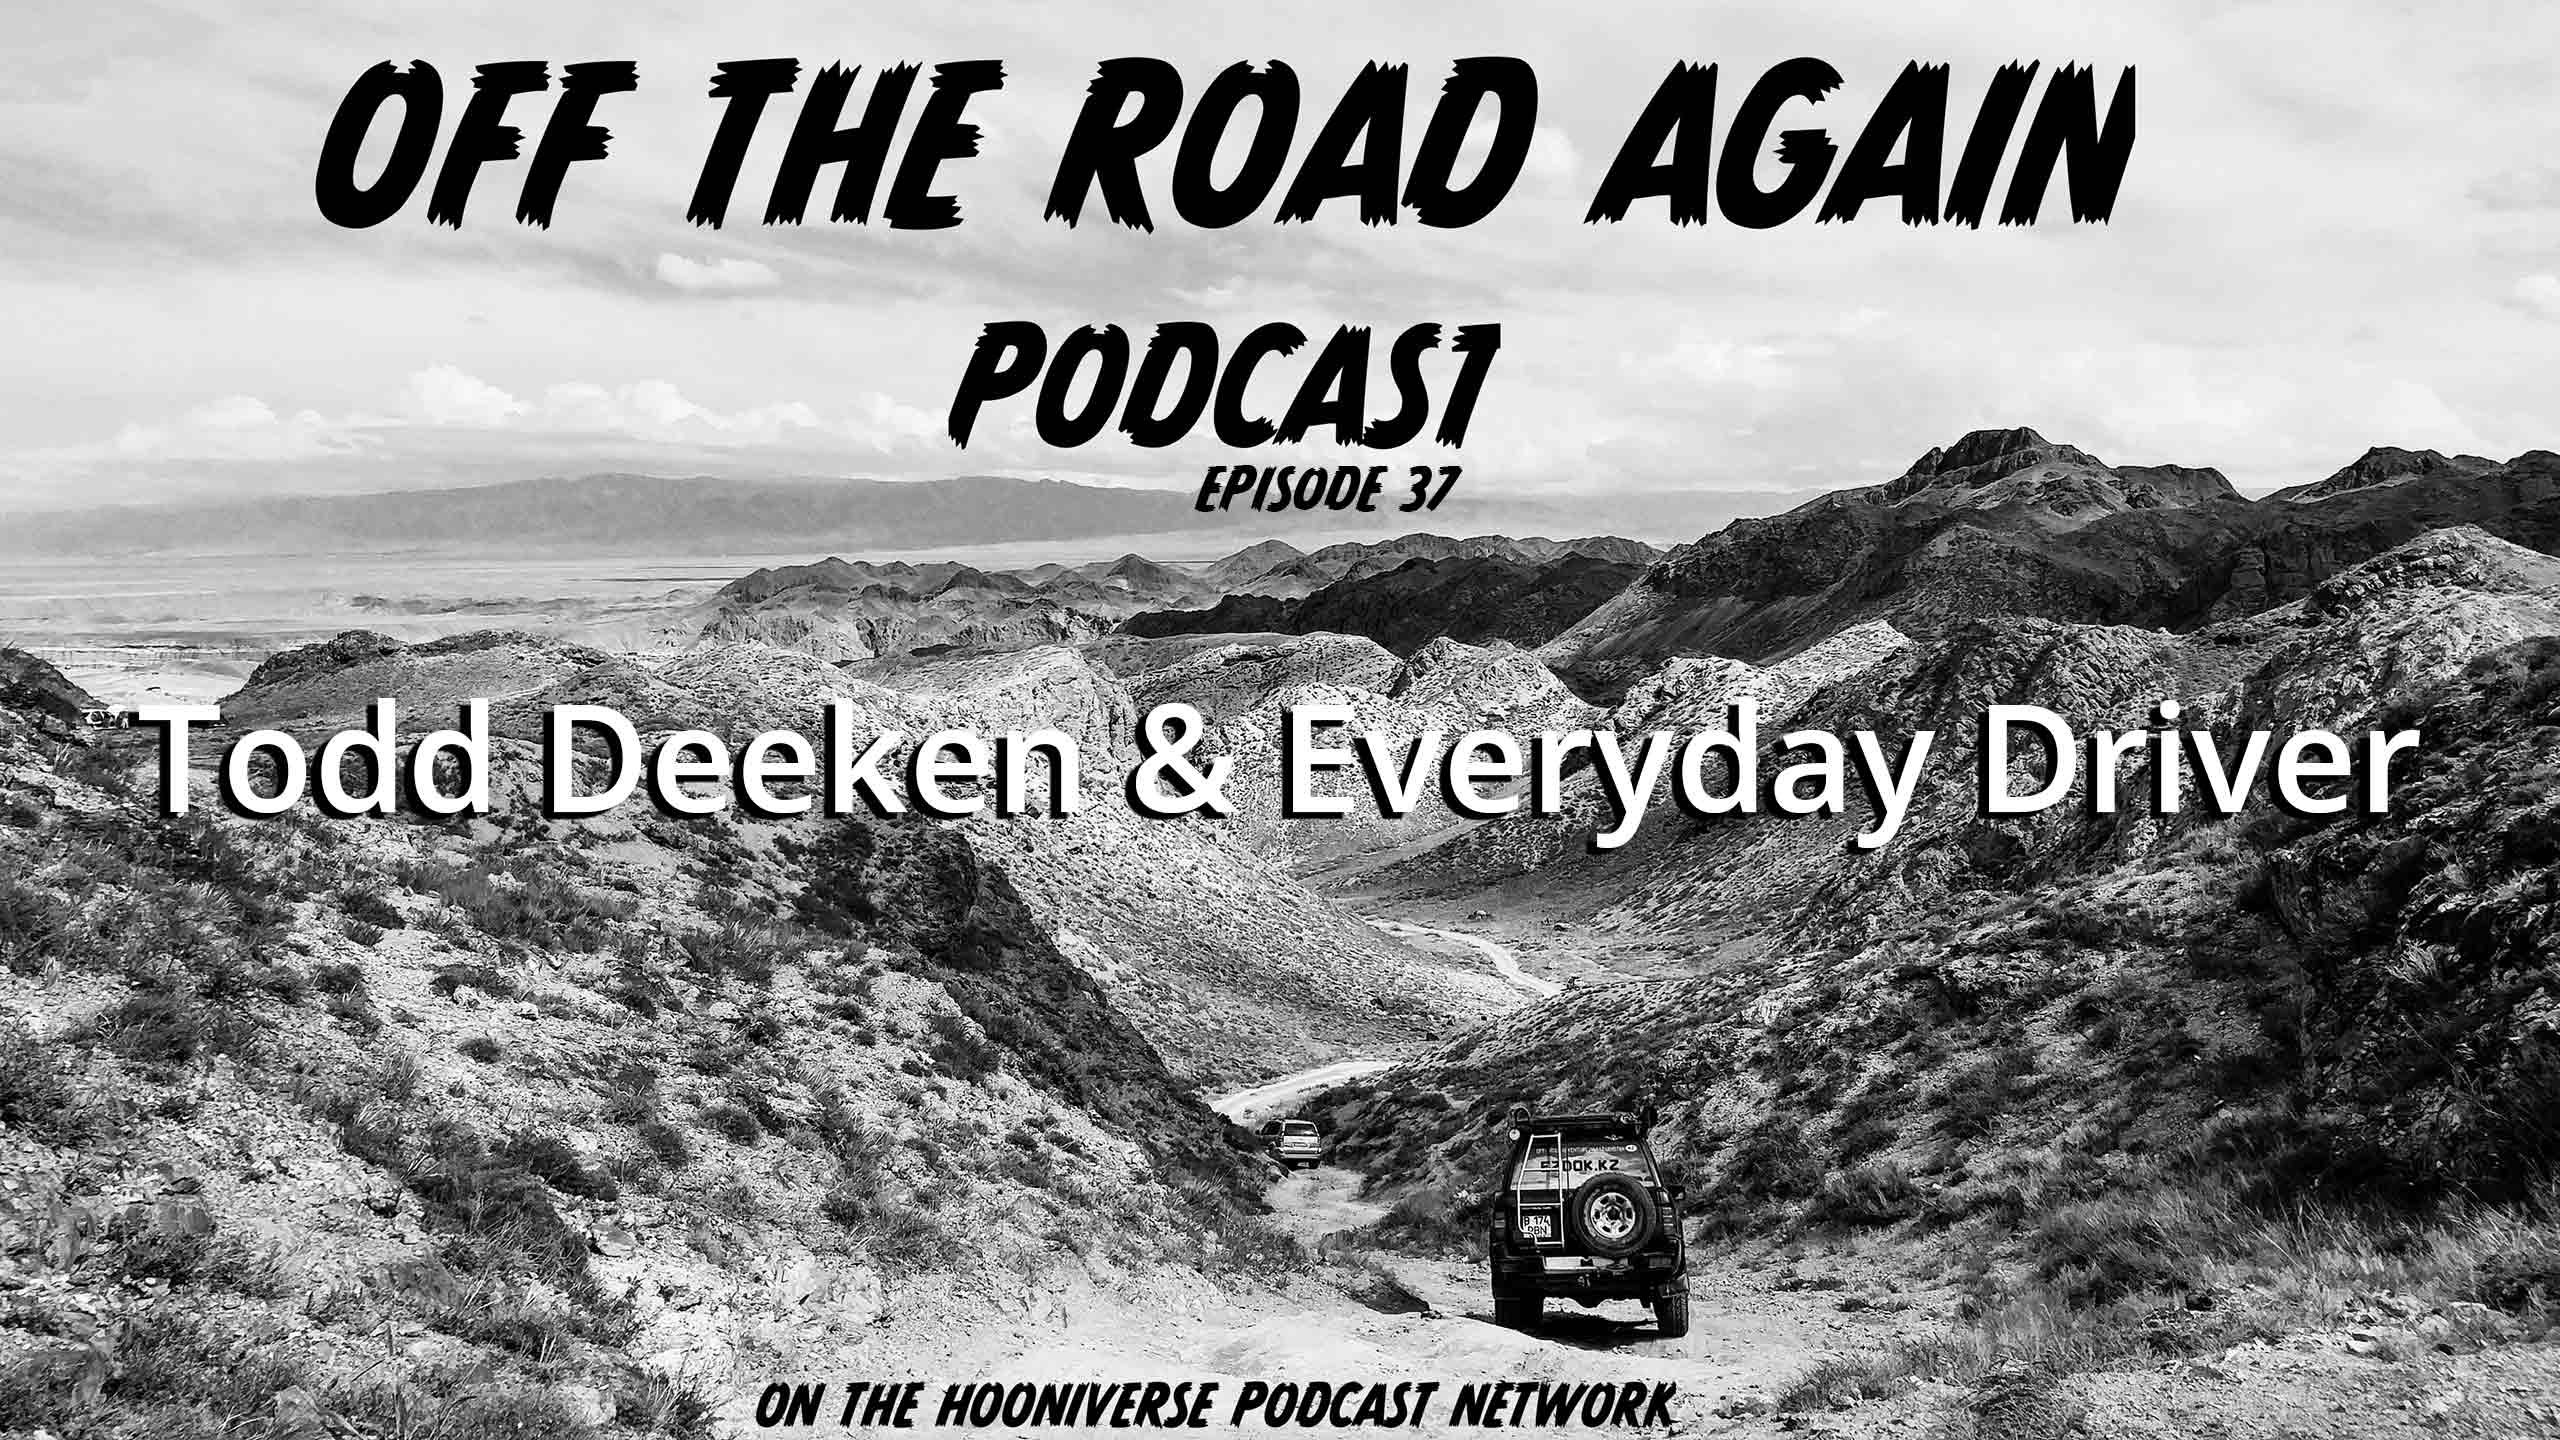 Todd-Deeken-Everyday-Driver-Off-The-Road-Again-Podcast-Episode-37